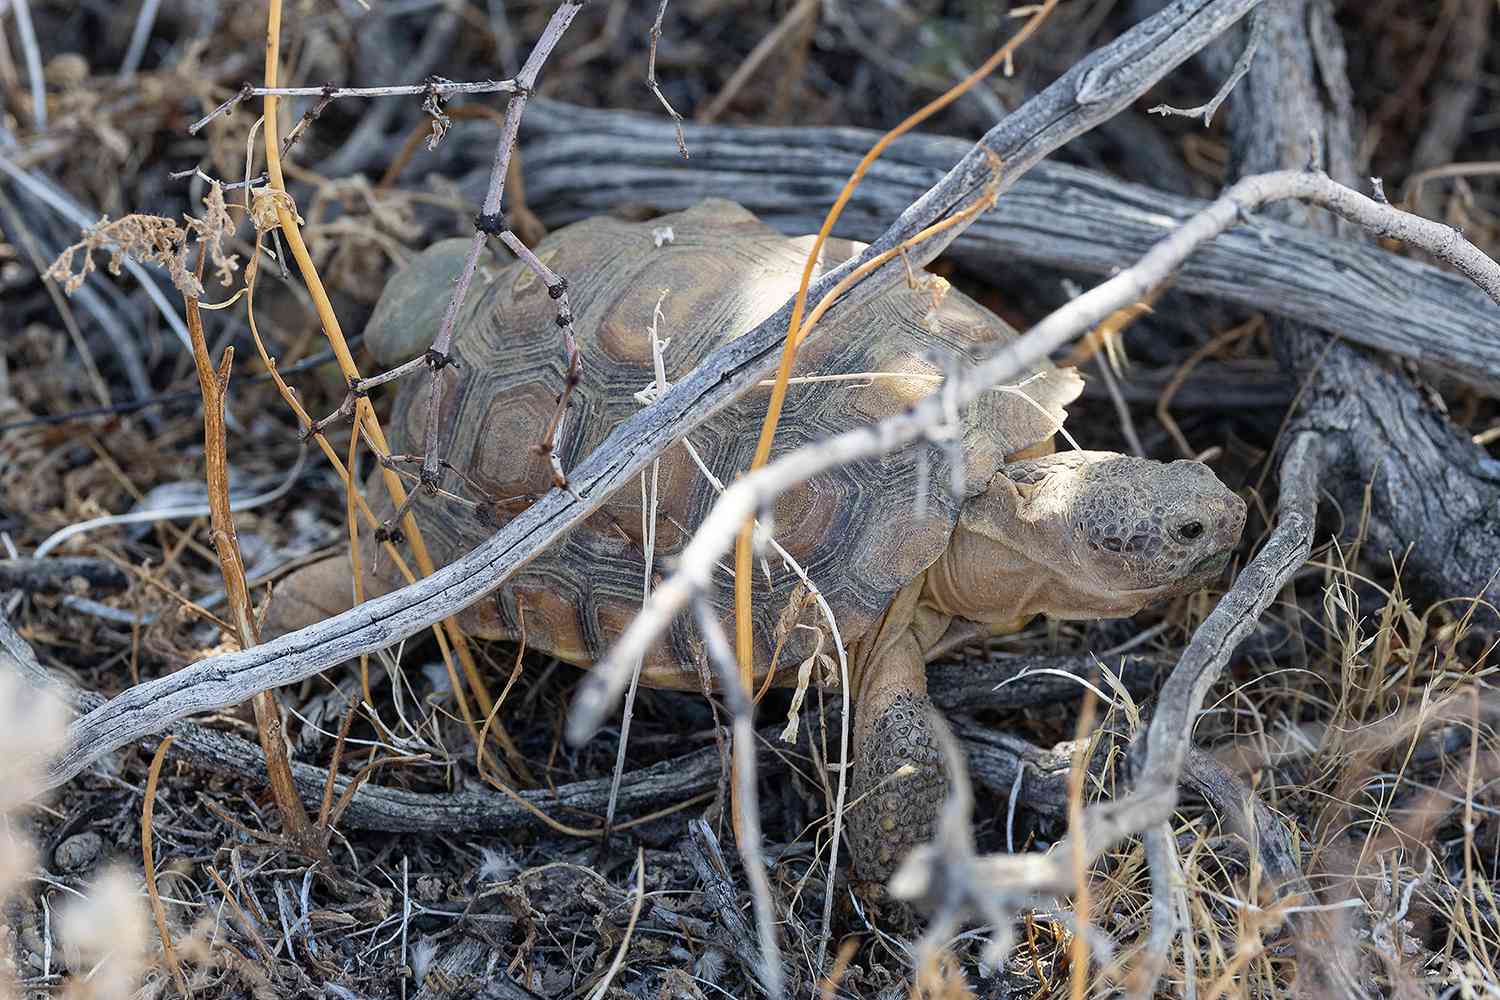 rare tortoise thriving after release